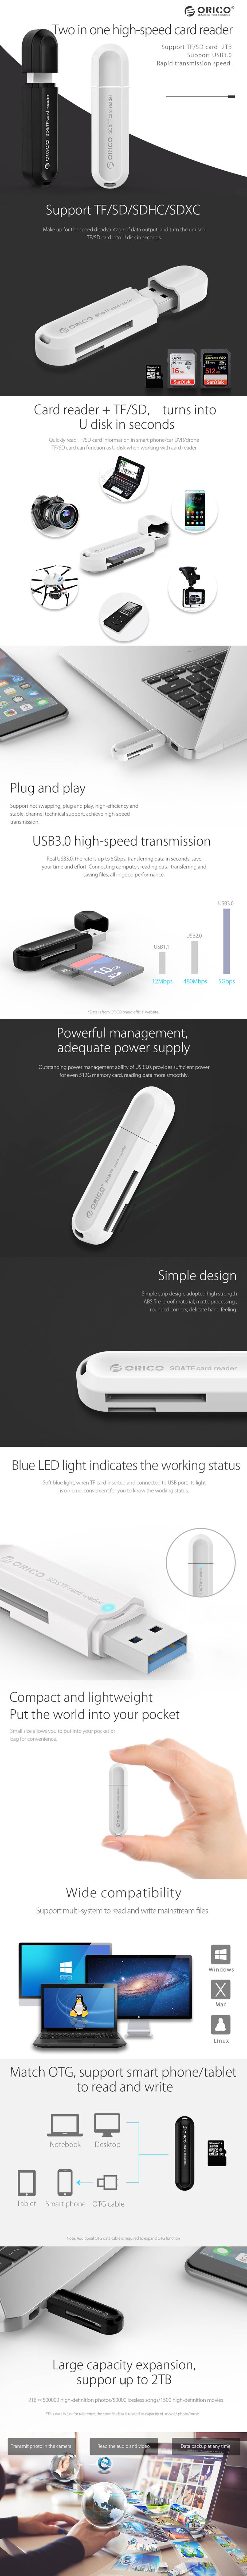 A large marketing image providing additional information about the product ORICO USB3.0 TF/SD Card Reader Black - Additional alt info not provided